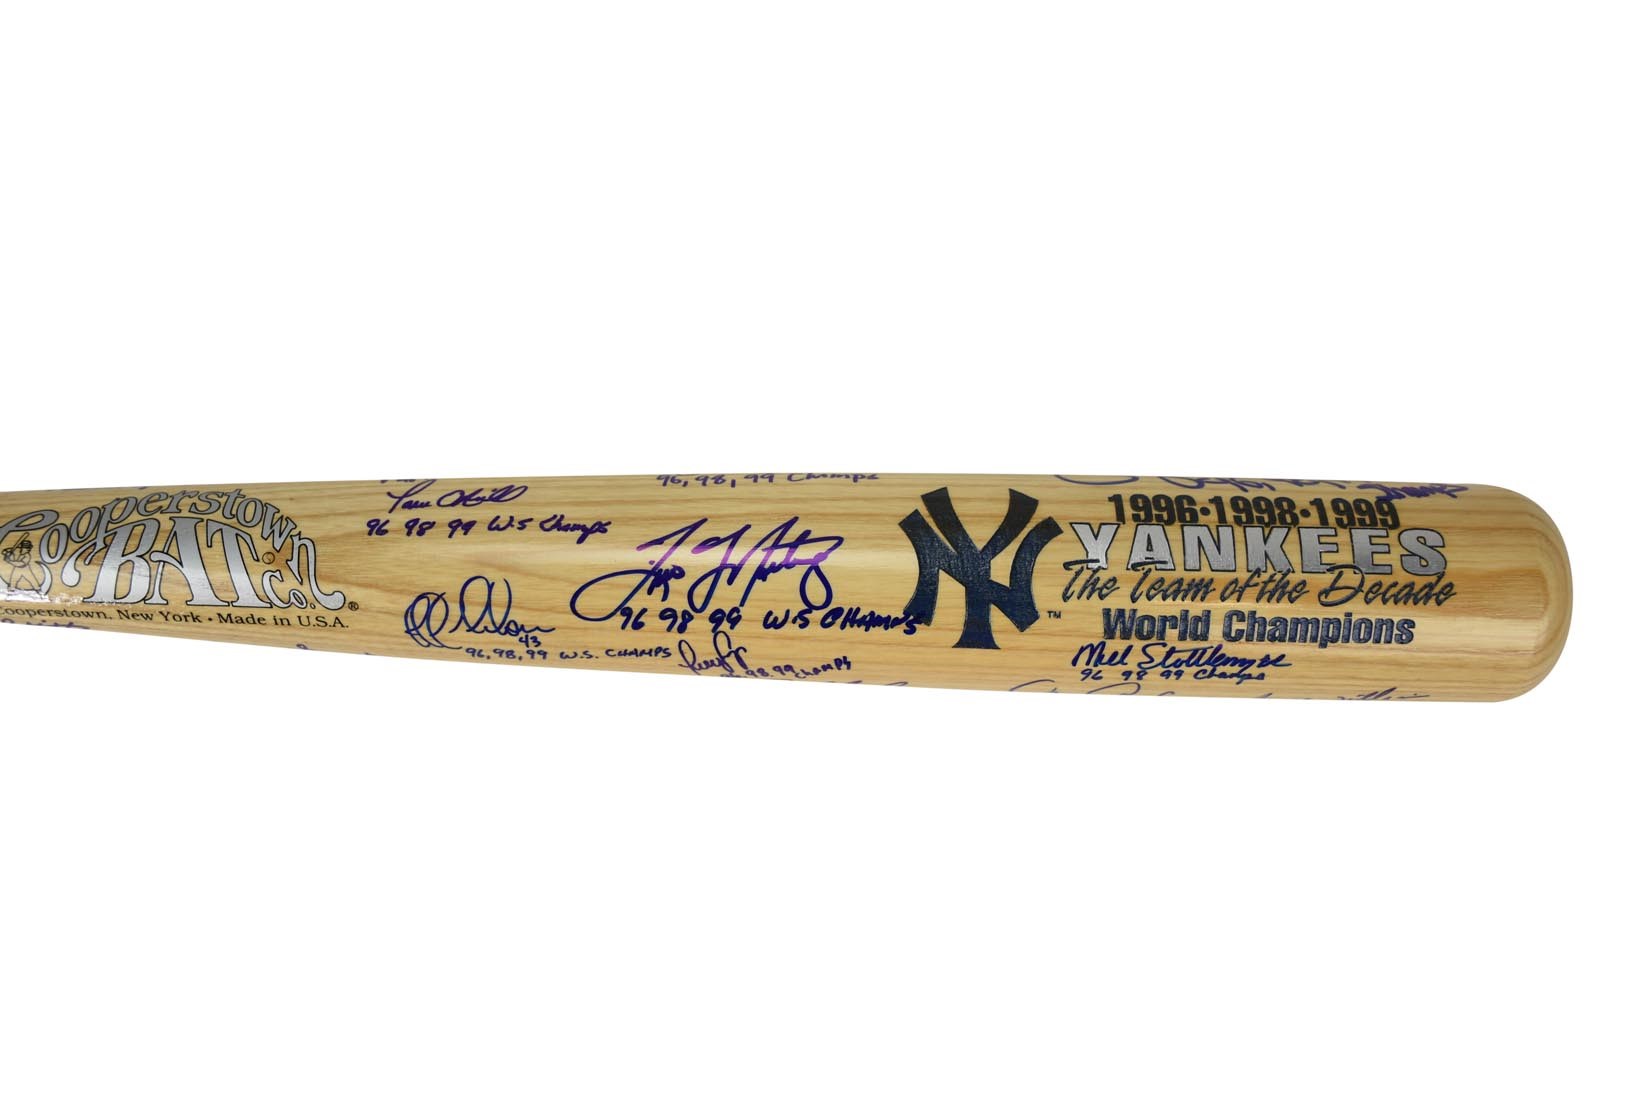 NY Yankees, Giants & Mets - 1996-99 NY Yankees World Series Champions Signed & Inscribed Bat - LE 1 of 25 (PSA)